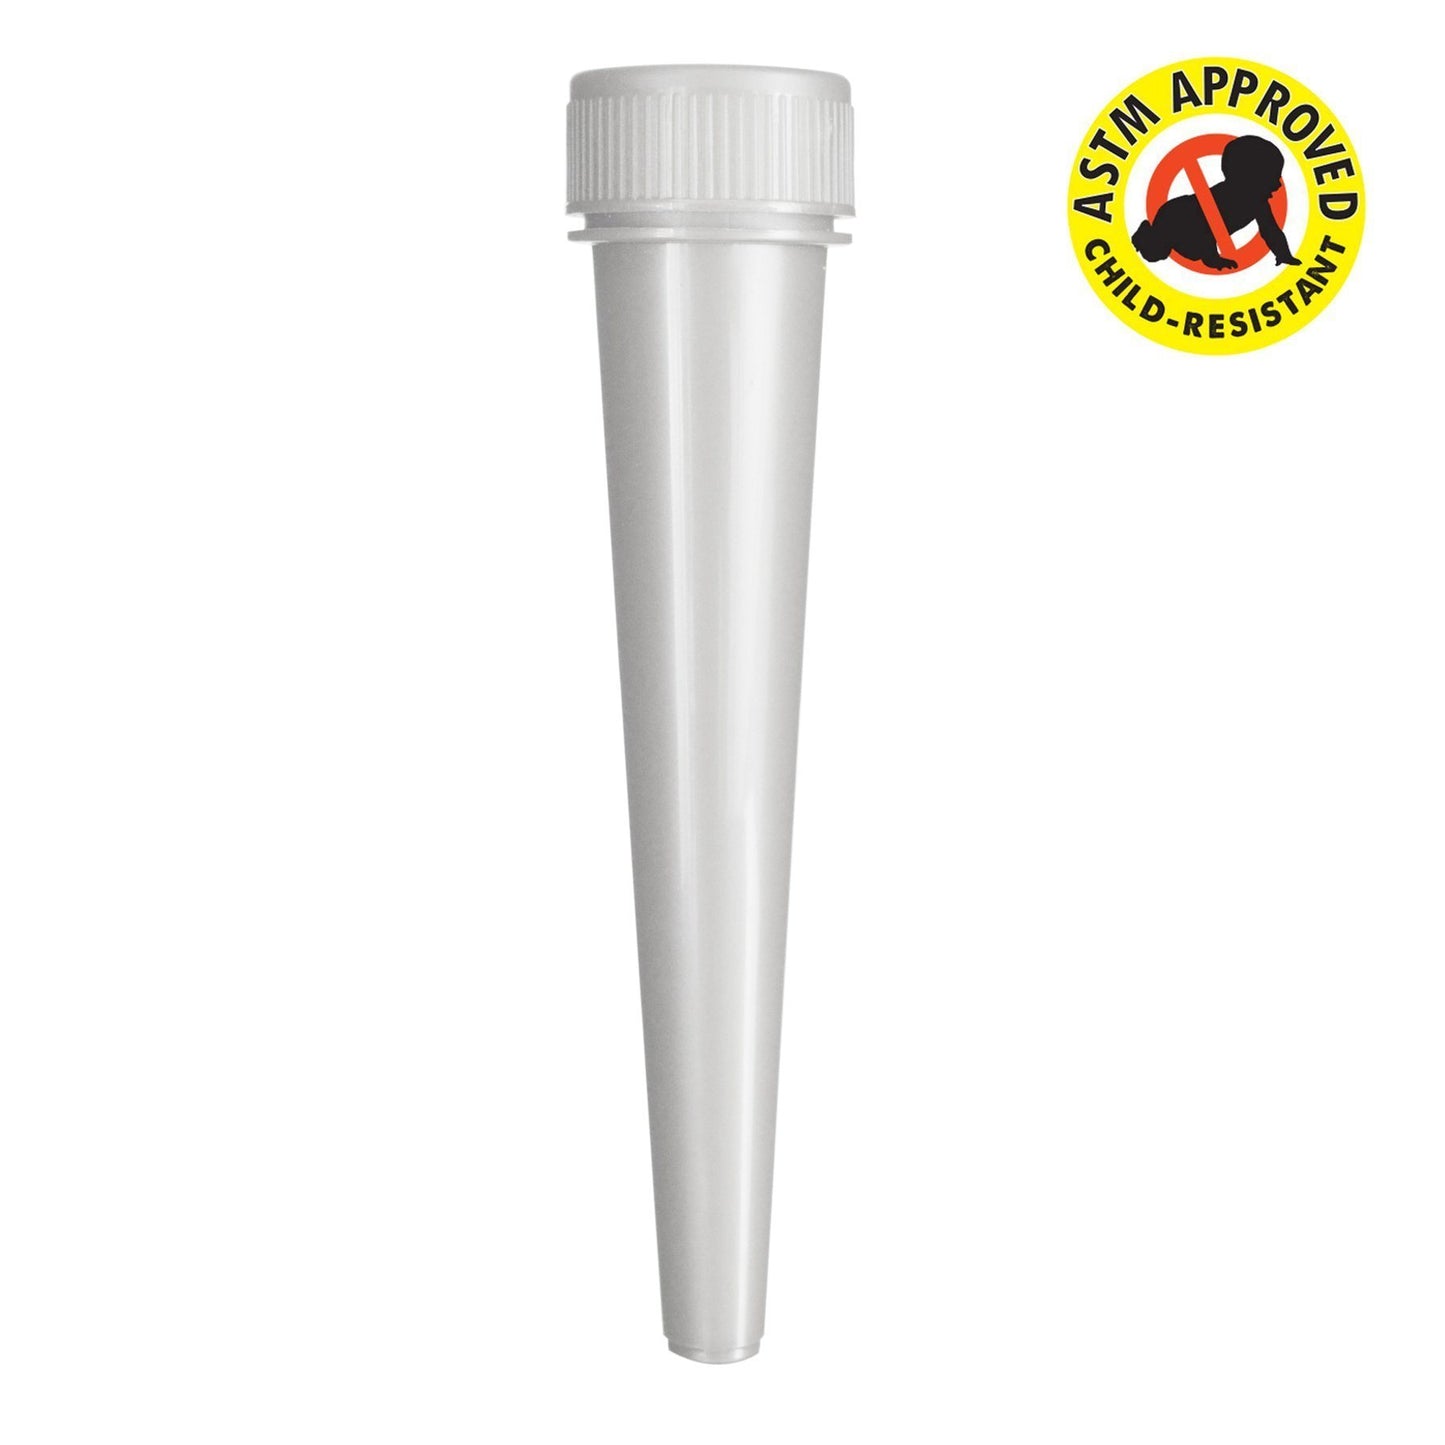 98mm Conical Tube Black, Gold or White Child Resistant (850 Count) Flower Power Packages White 